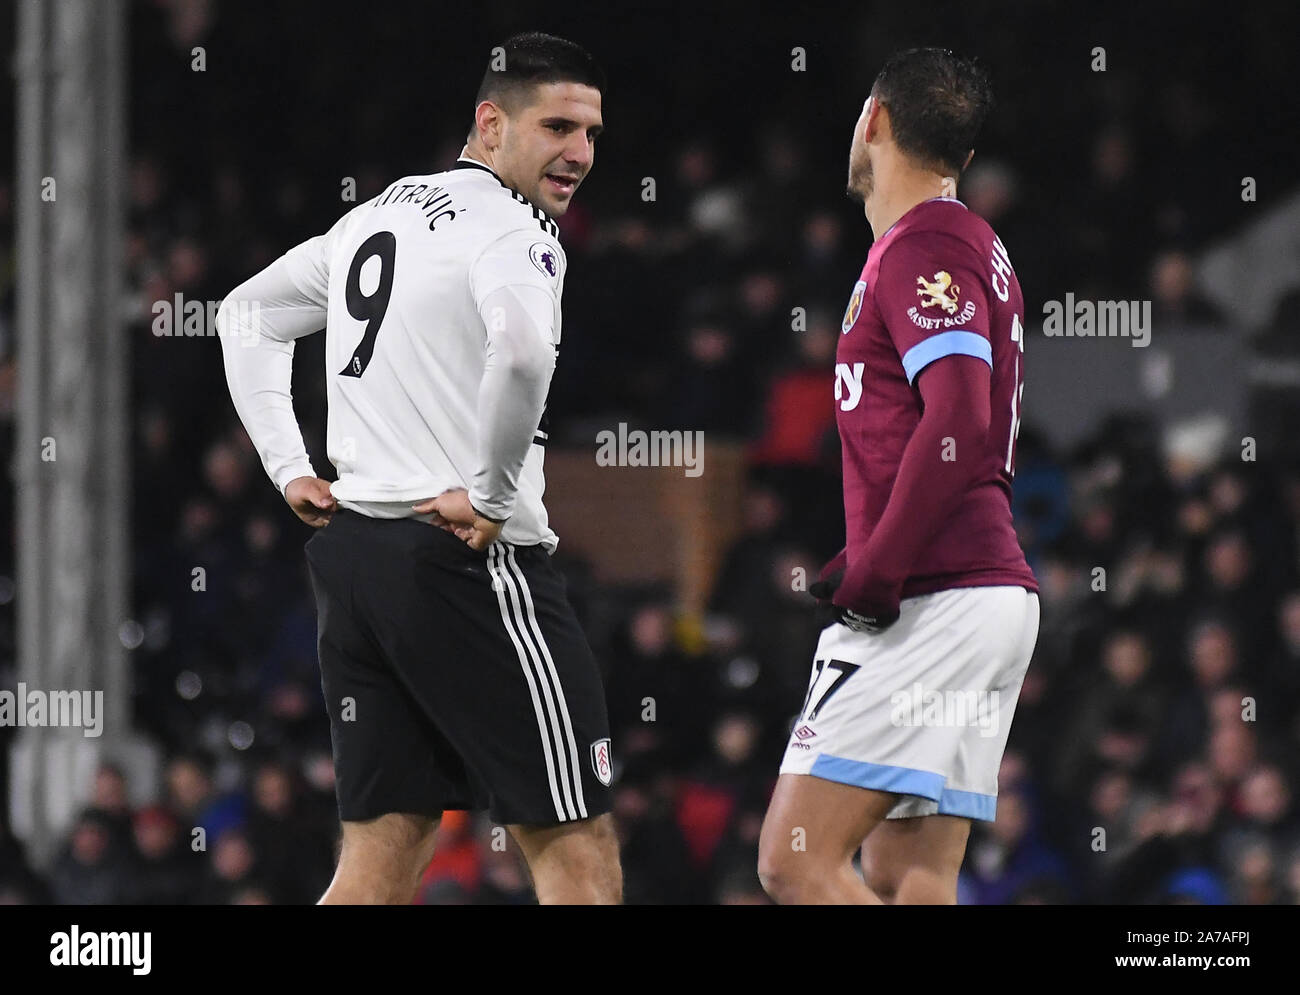 LONDON, ENGLAND - DECEMBER 15, 2018: Aleksandar Mitrovic of Fulham (L) and Javier Hernandez Balcazar (Chicharito) of West Ham (R) pictured during the 2018/19 Premier League game between Fulham FC and West Ham United at Craven Cottage. Stock Photo